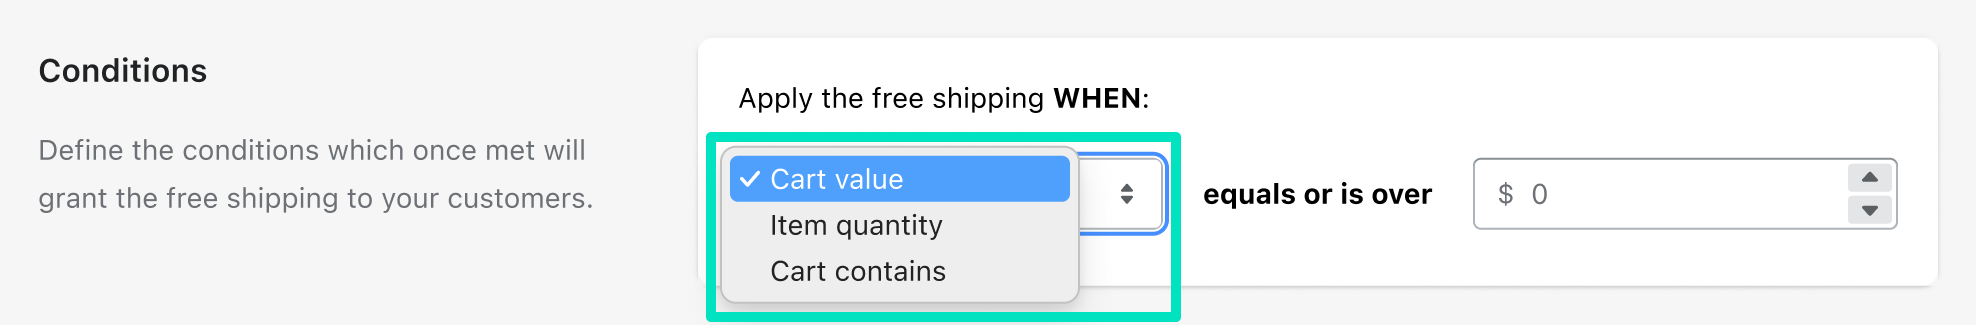 Octolize Free Shipping Goals rules select